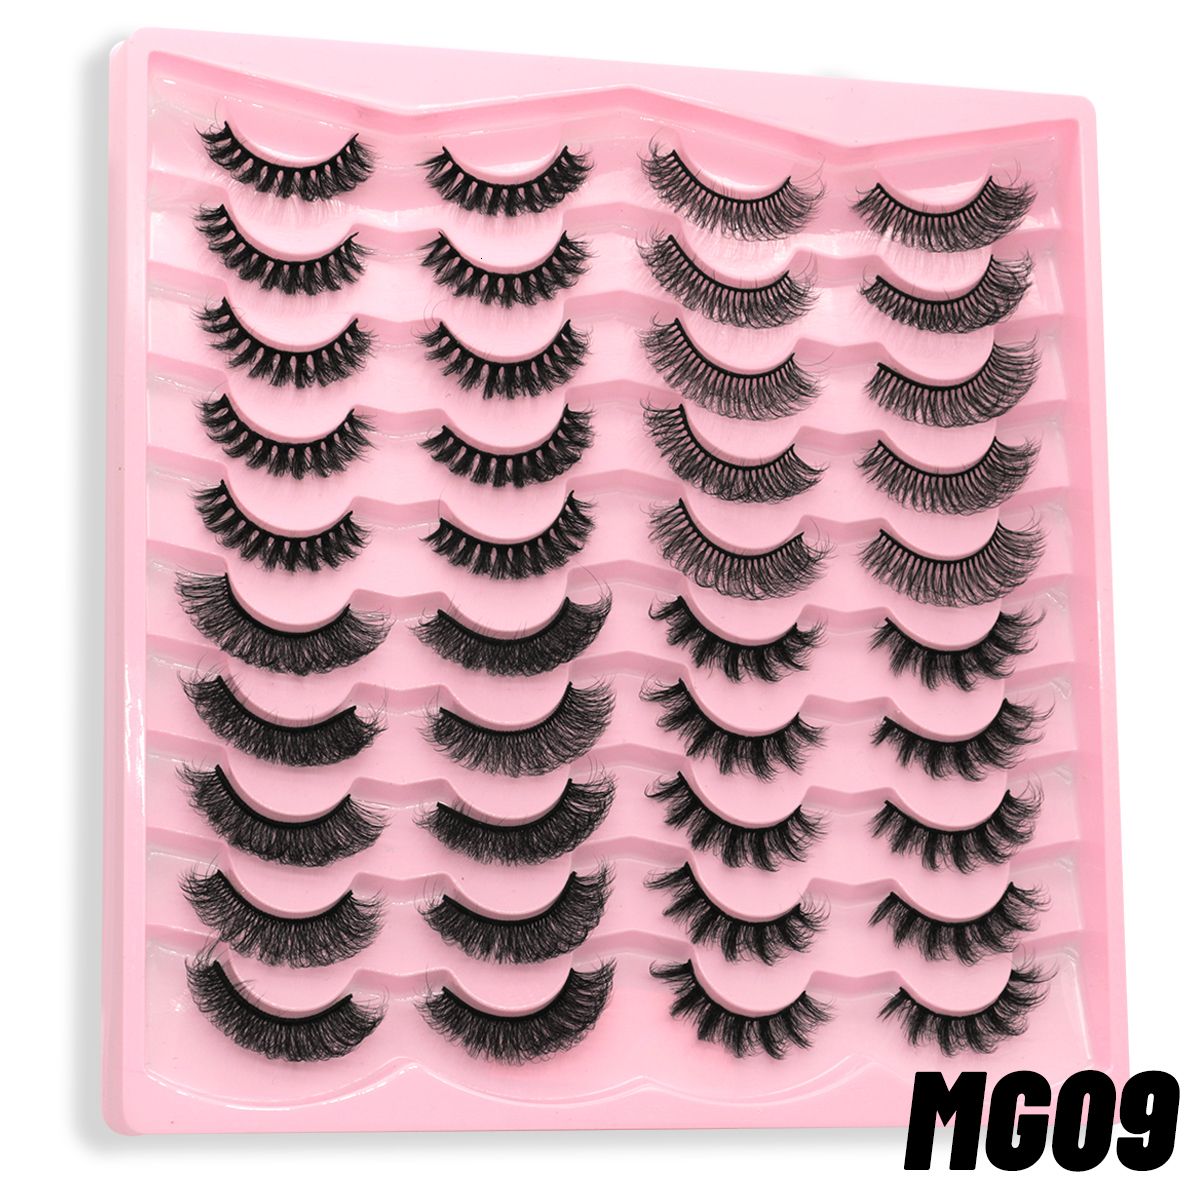 D-curl20pairs Mg-09